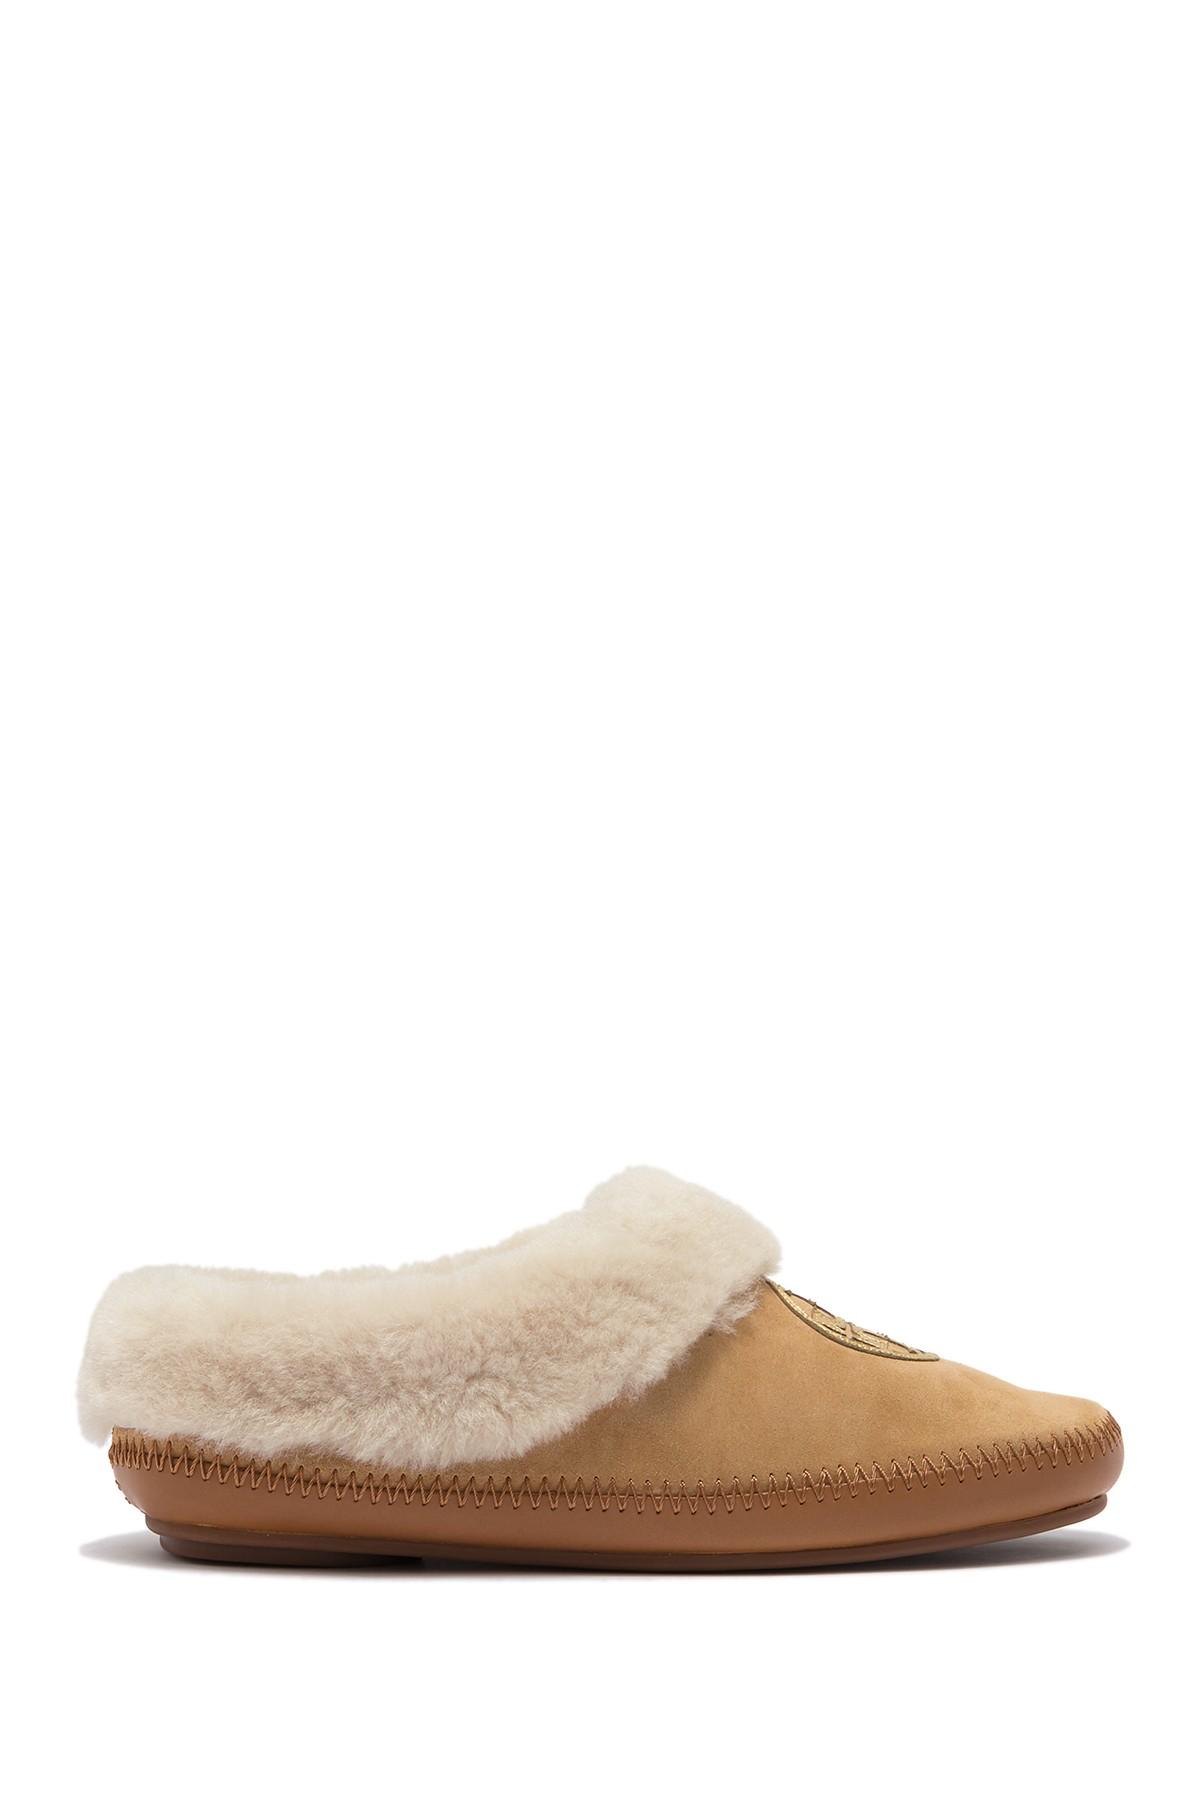 Tory Burch Leather Coley Genuine Shearling Slipper - Lyst